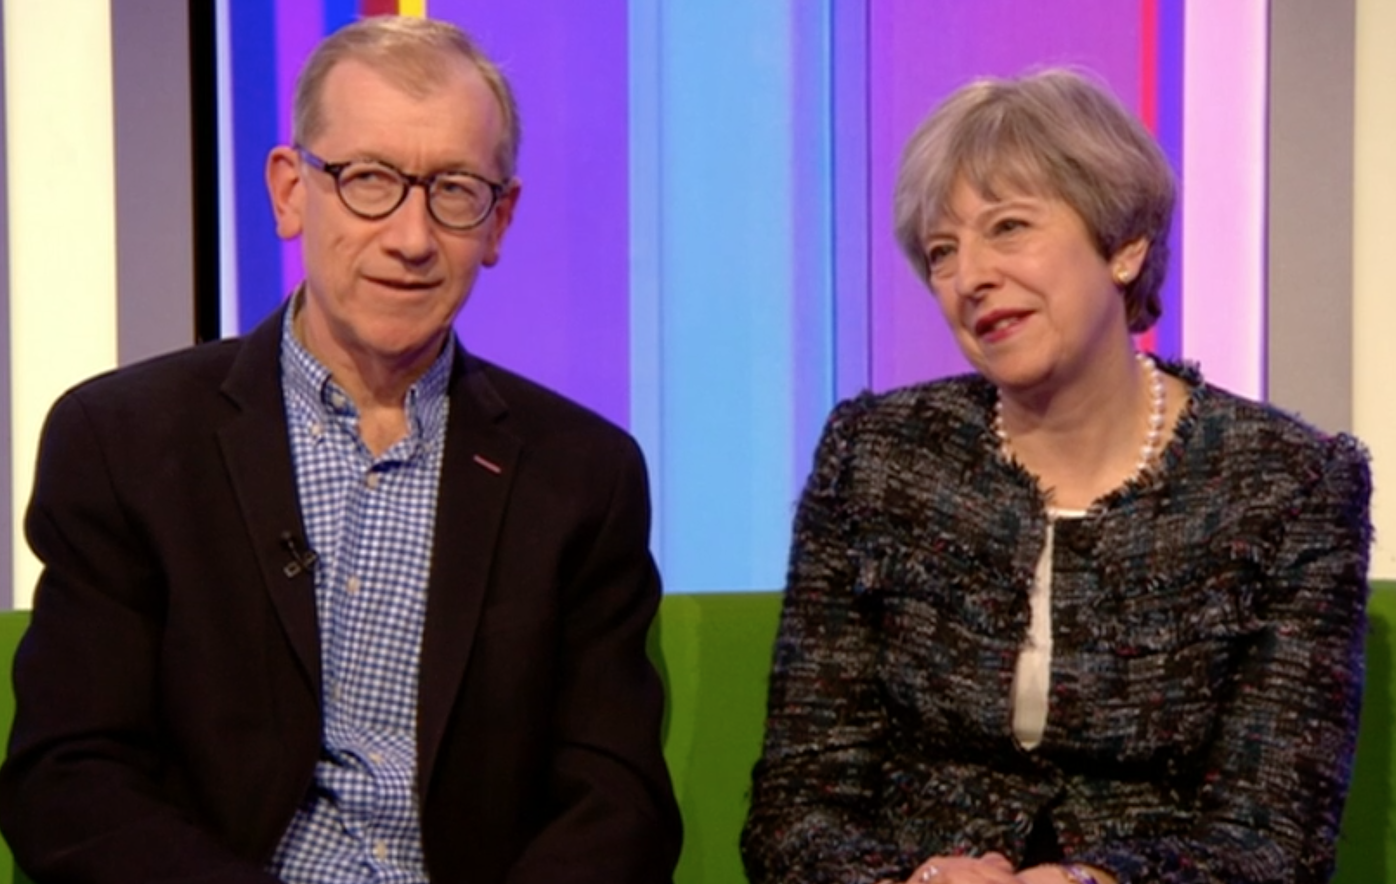 Theresa May appeared on The One Show with her husband, Philip